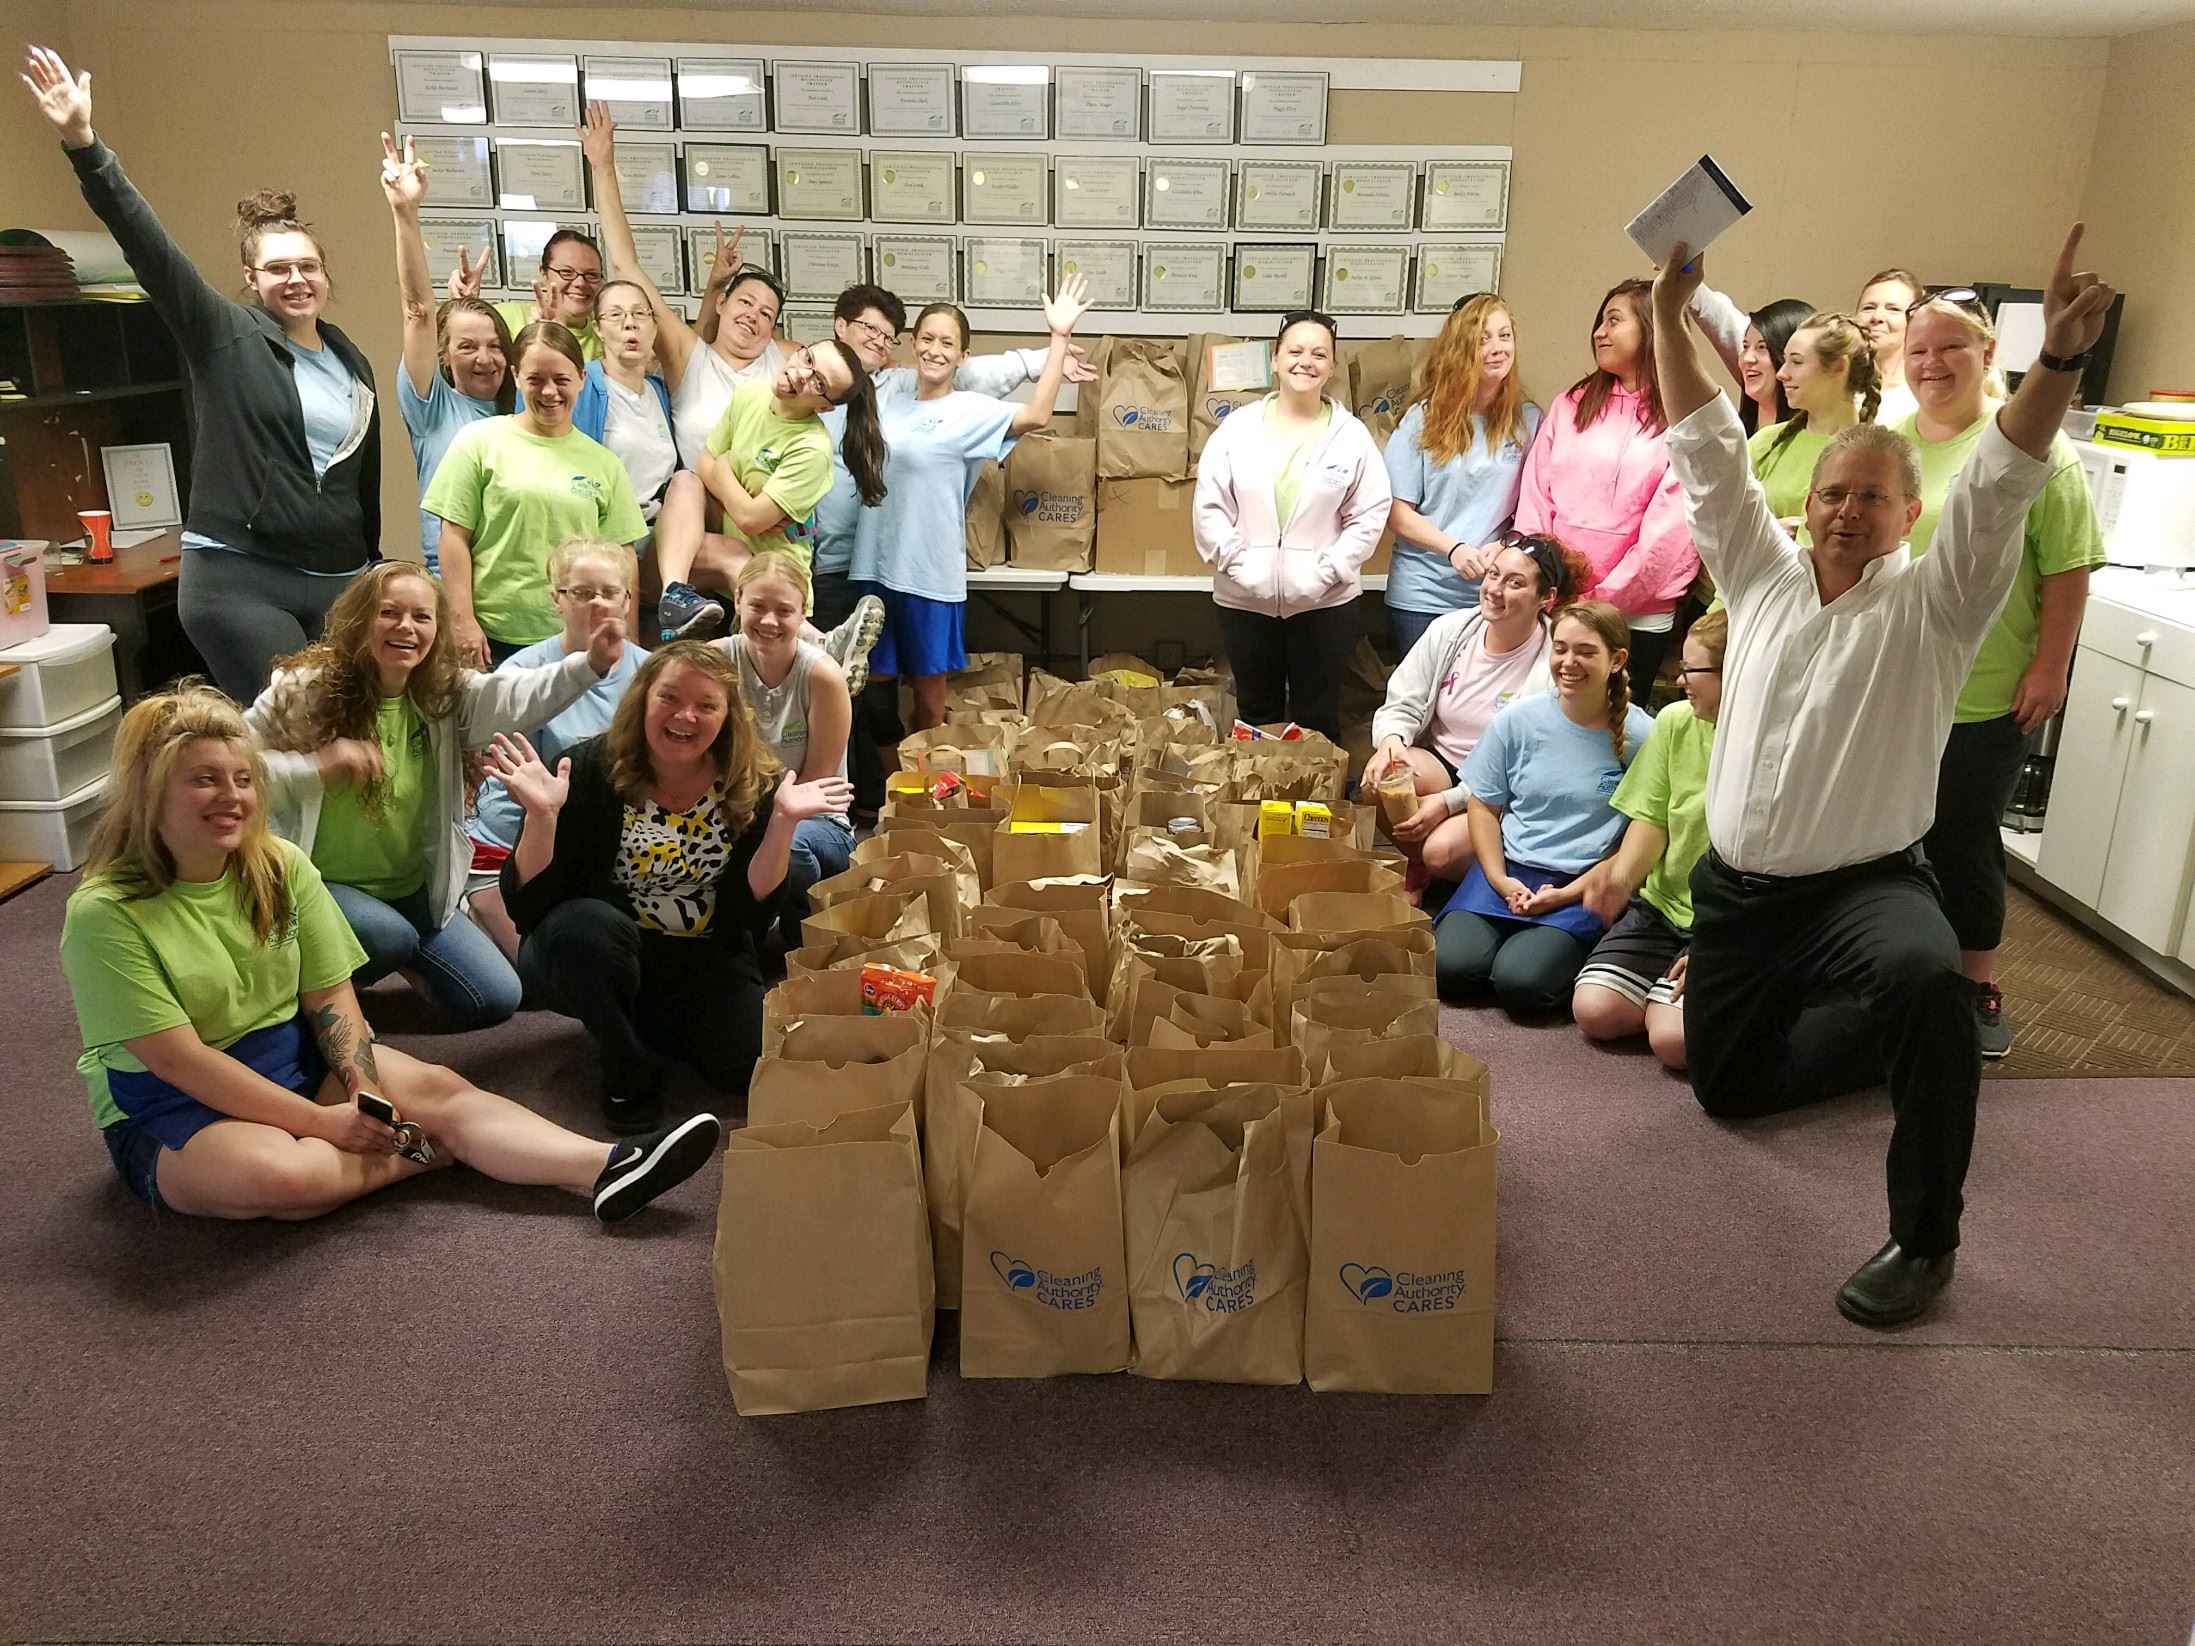 The TCA Dayton team poses with the food donations collected for local charities.